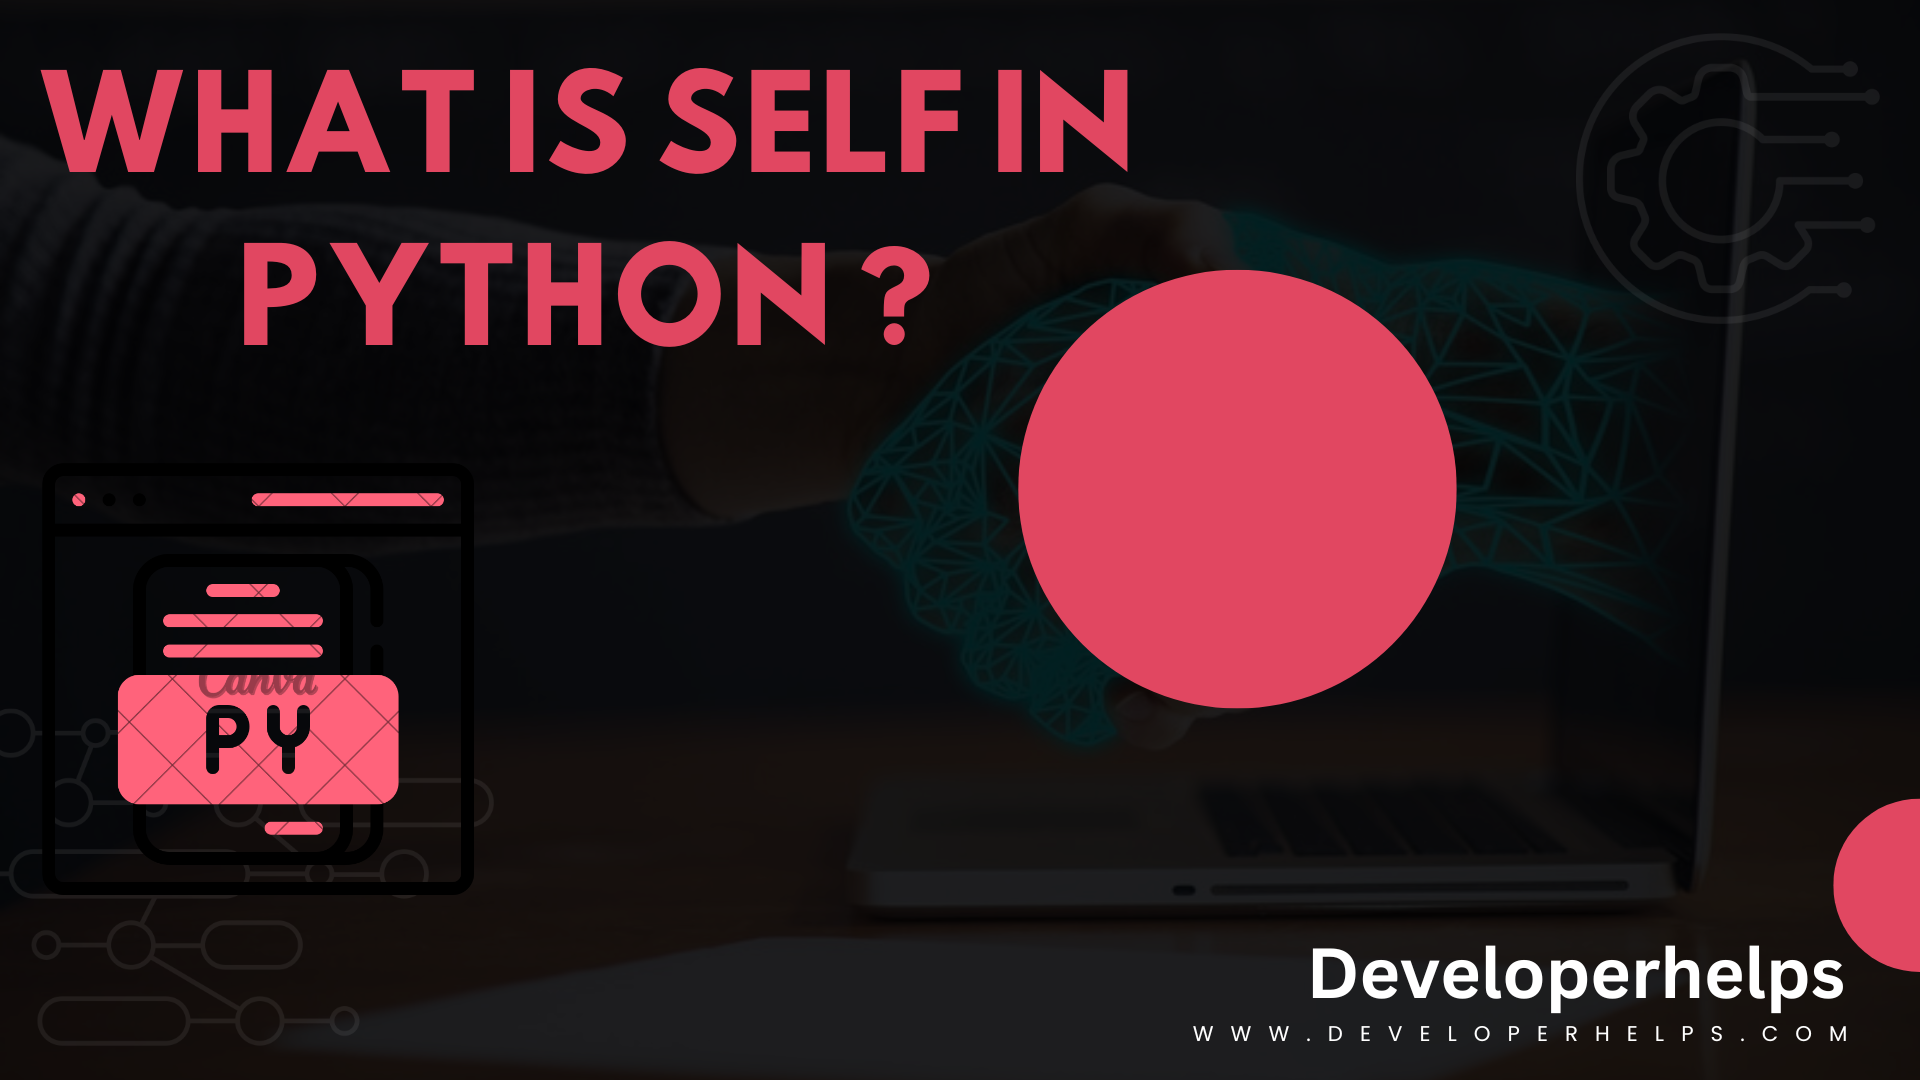 What is Self in Python?